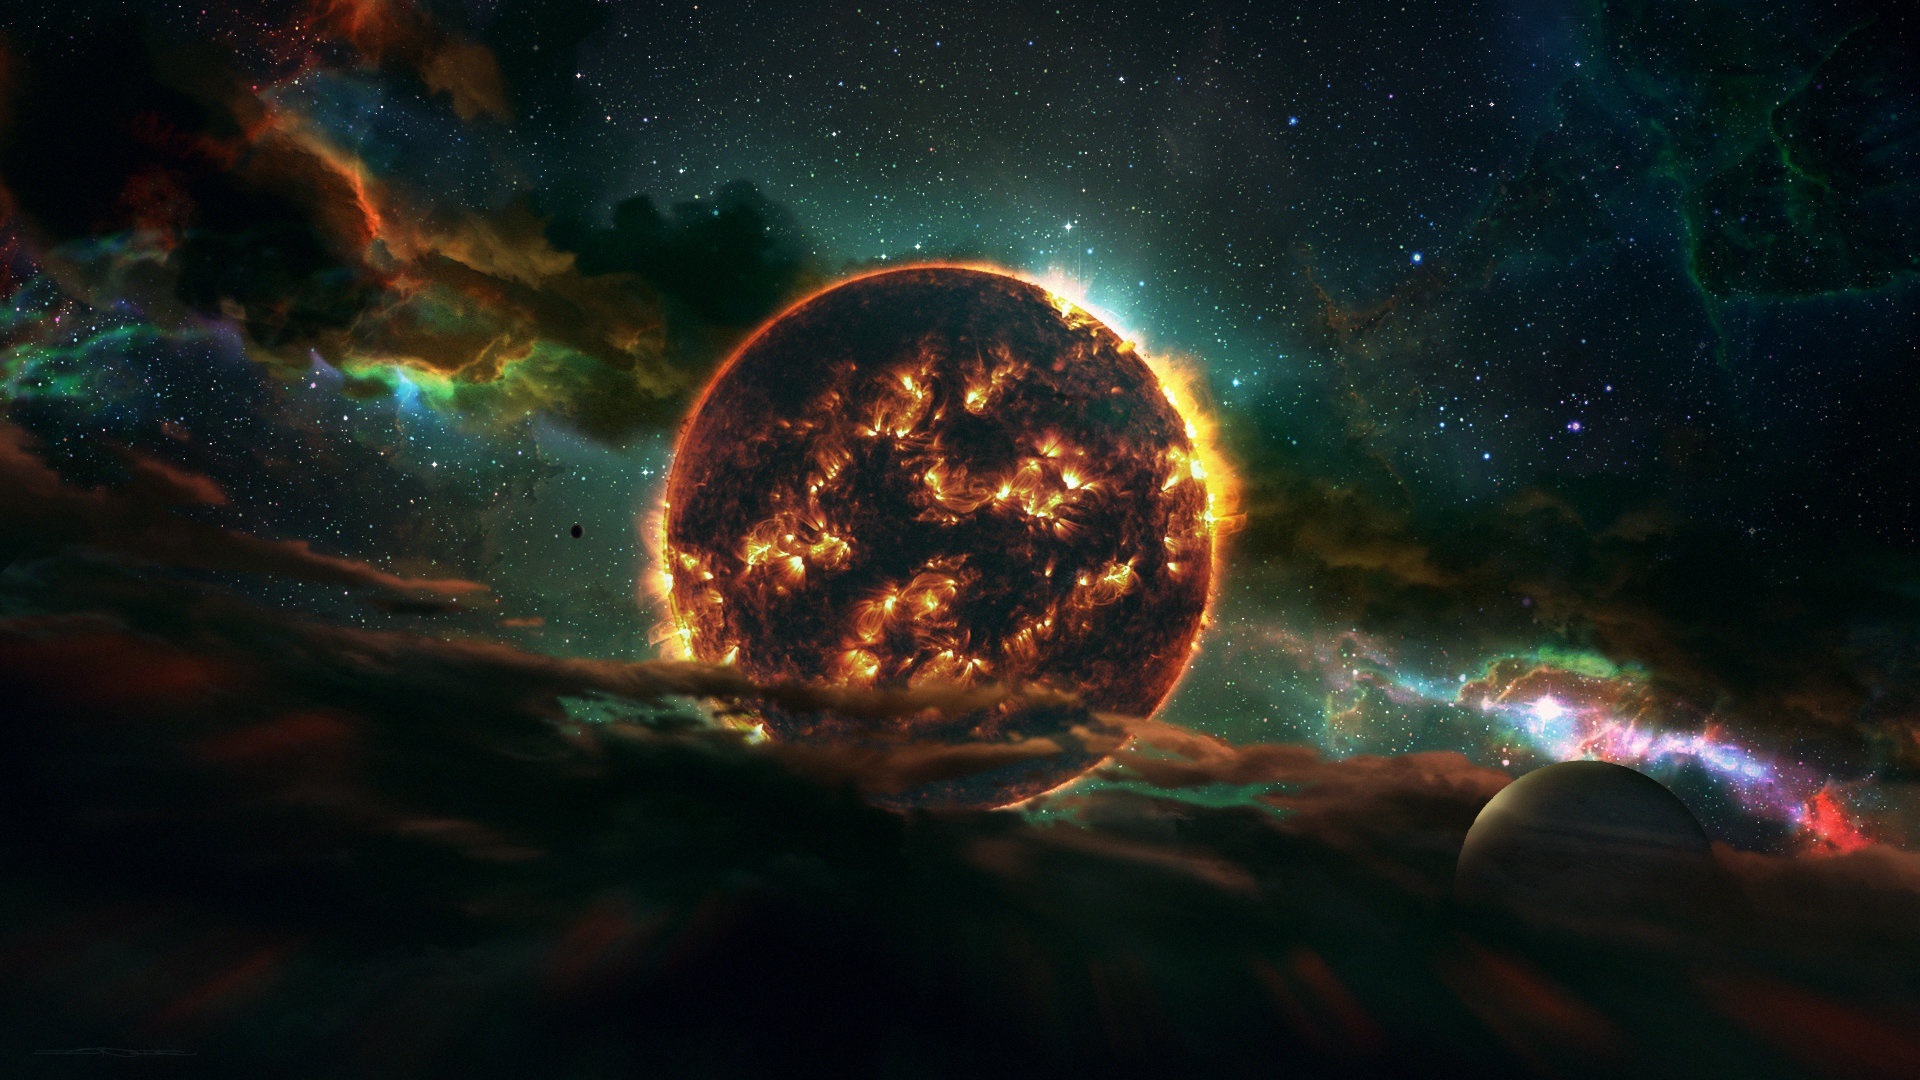 Wallpaper Dead Star, space, planet, universe 1920x1080 Full HD 2K Picture, Image